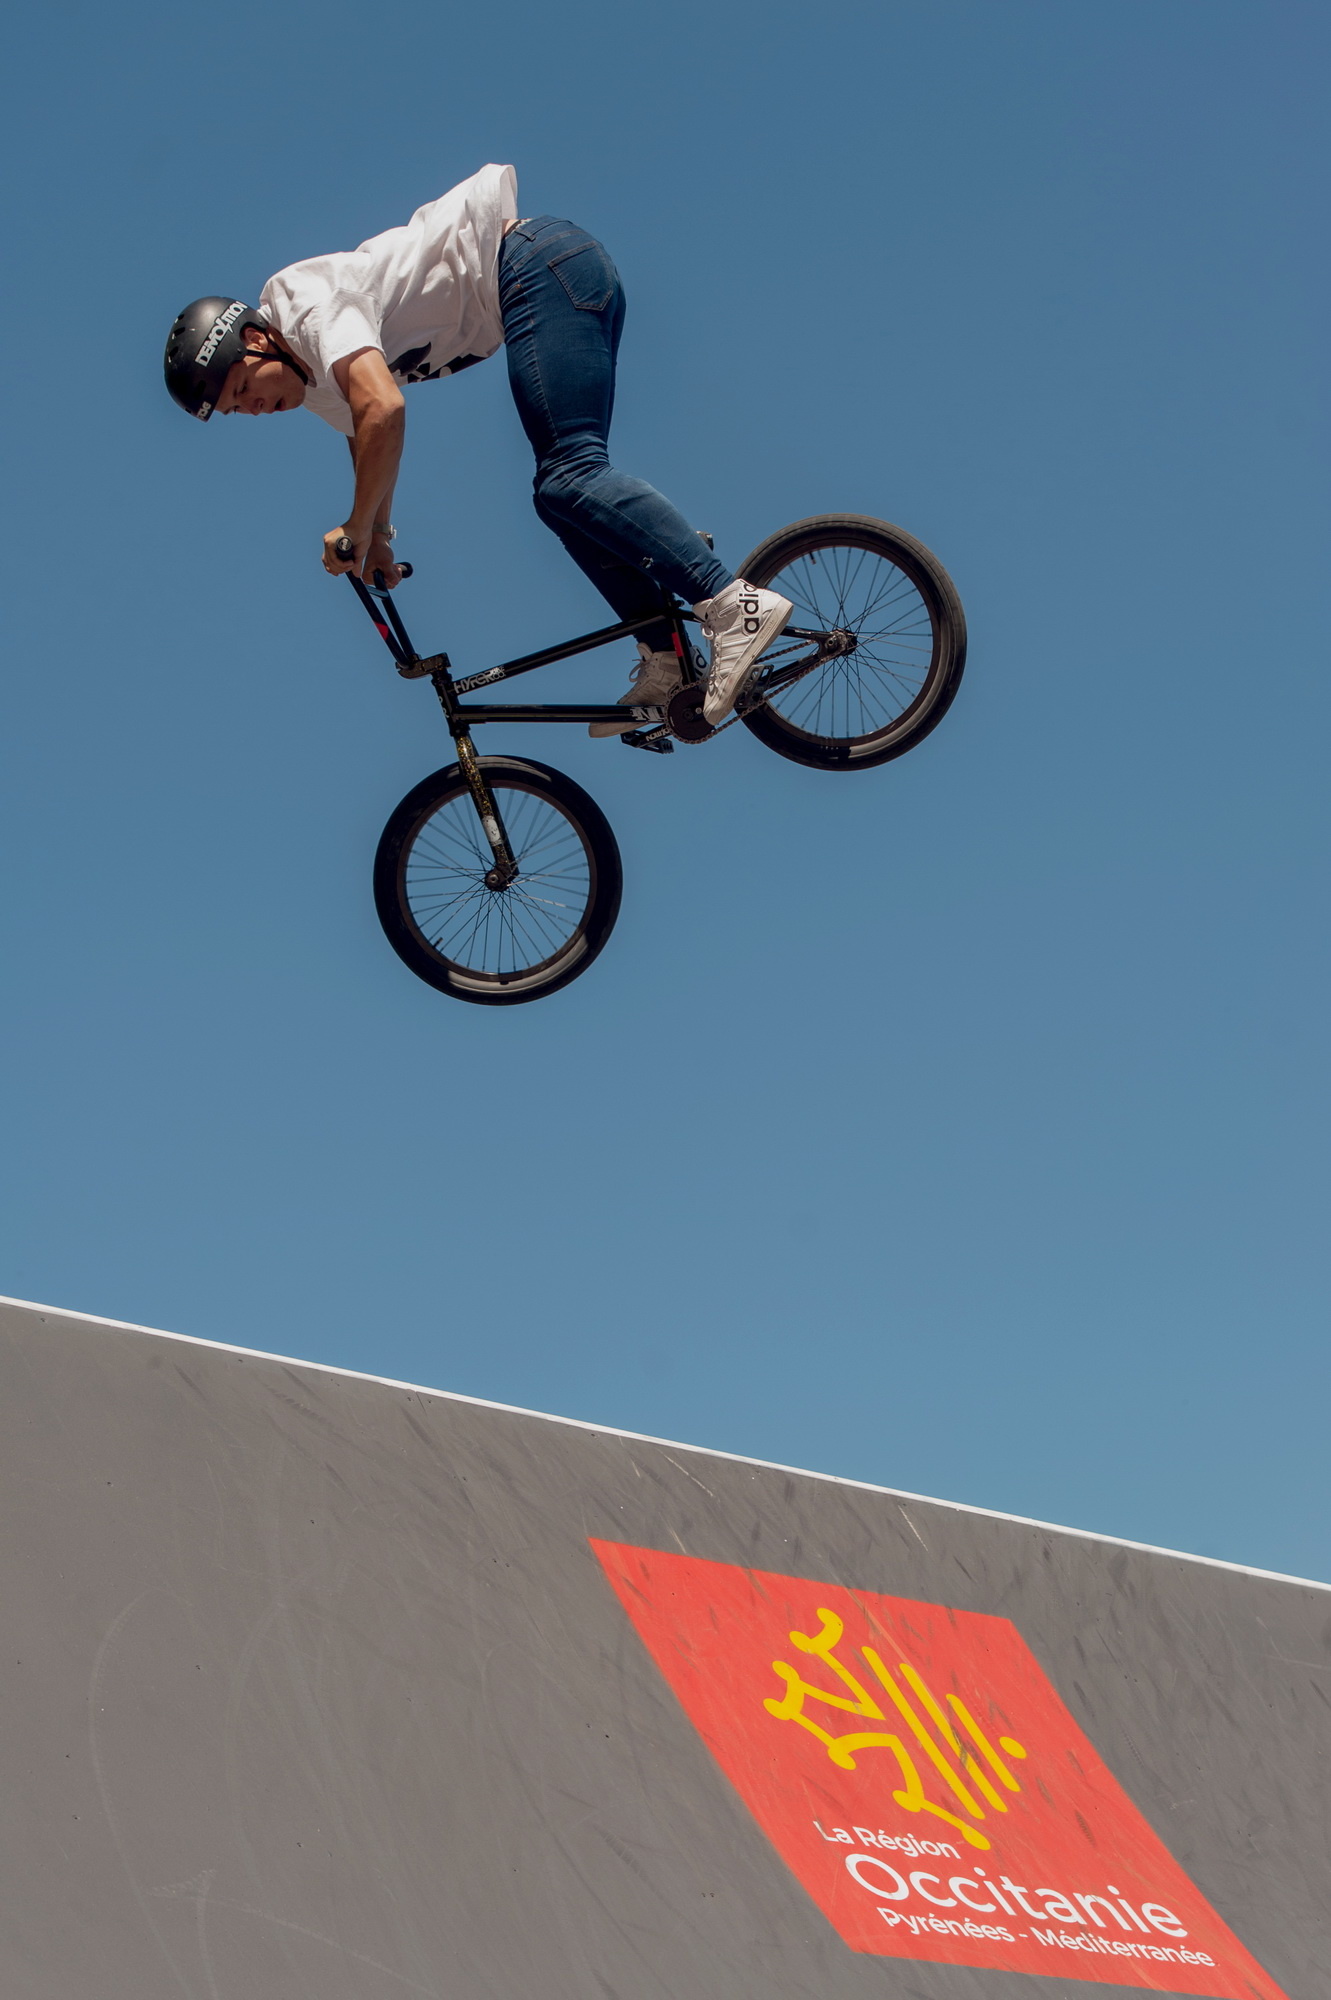 FISE World Series, Montpellier, Studio photography, Action sports, 1340x2000 HD Handy